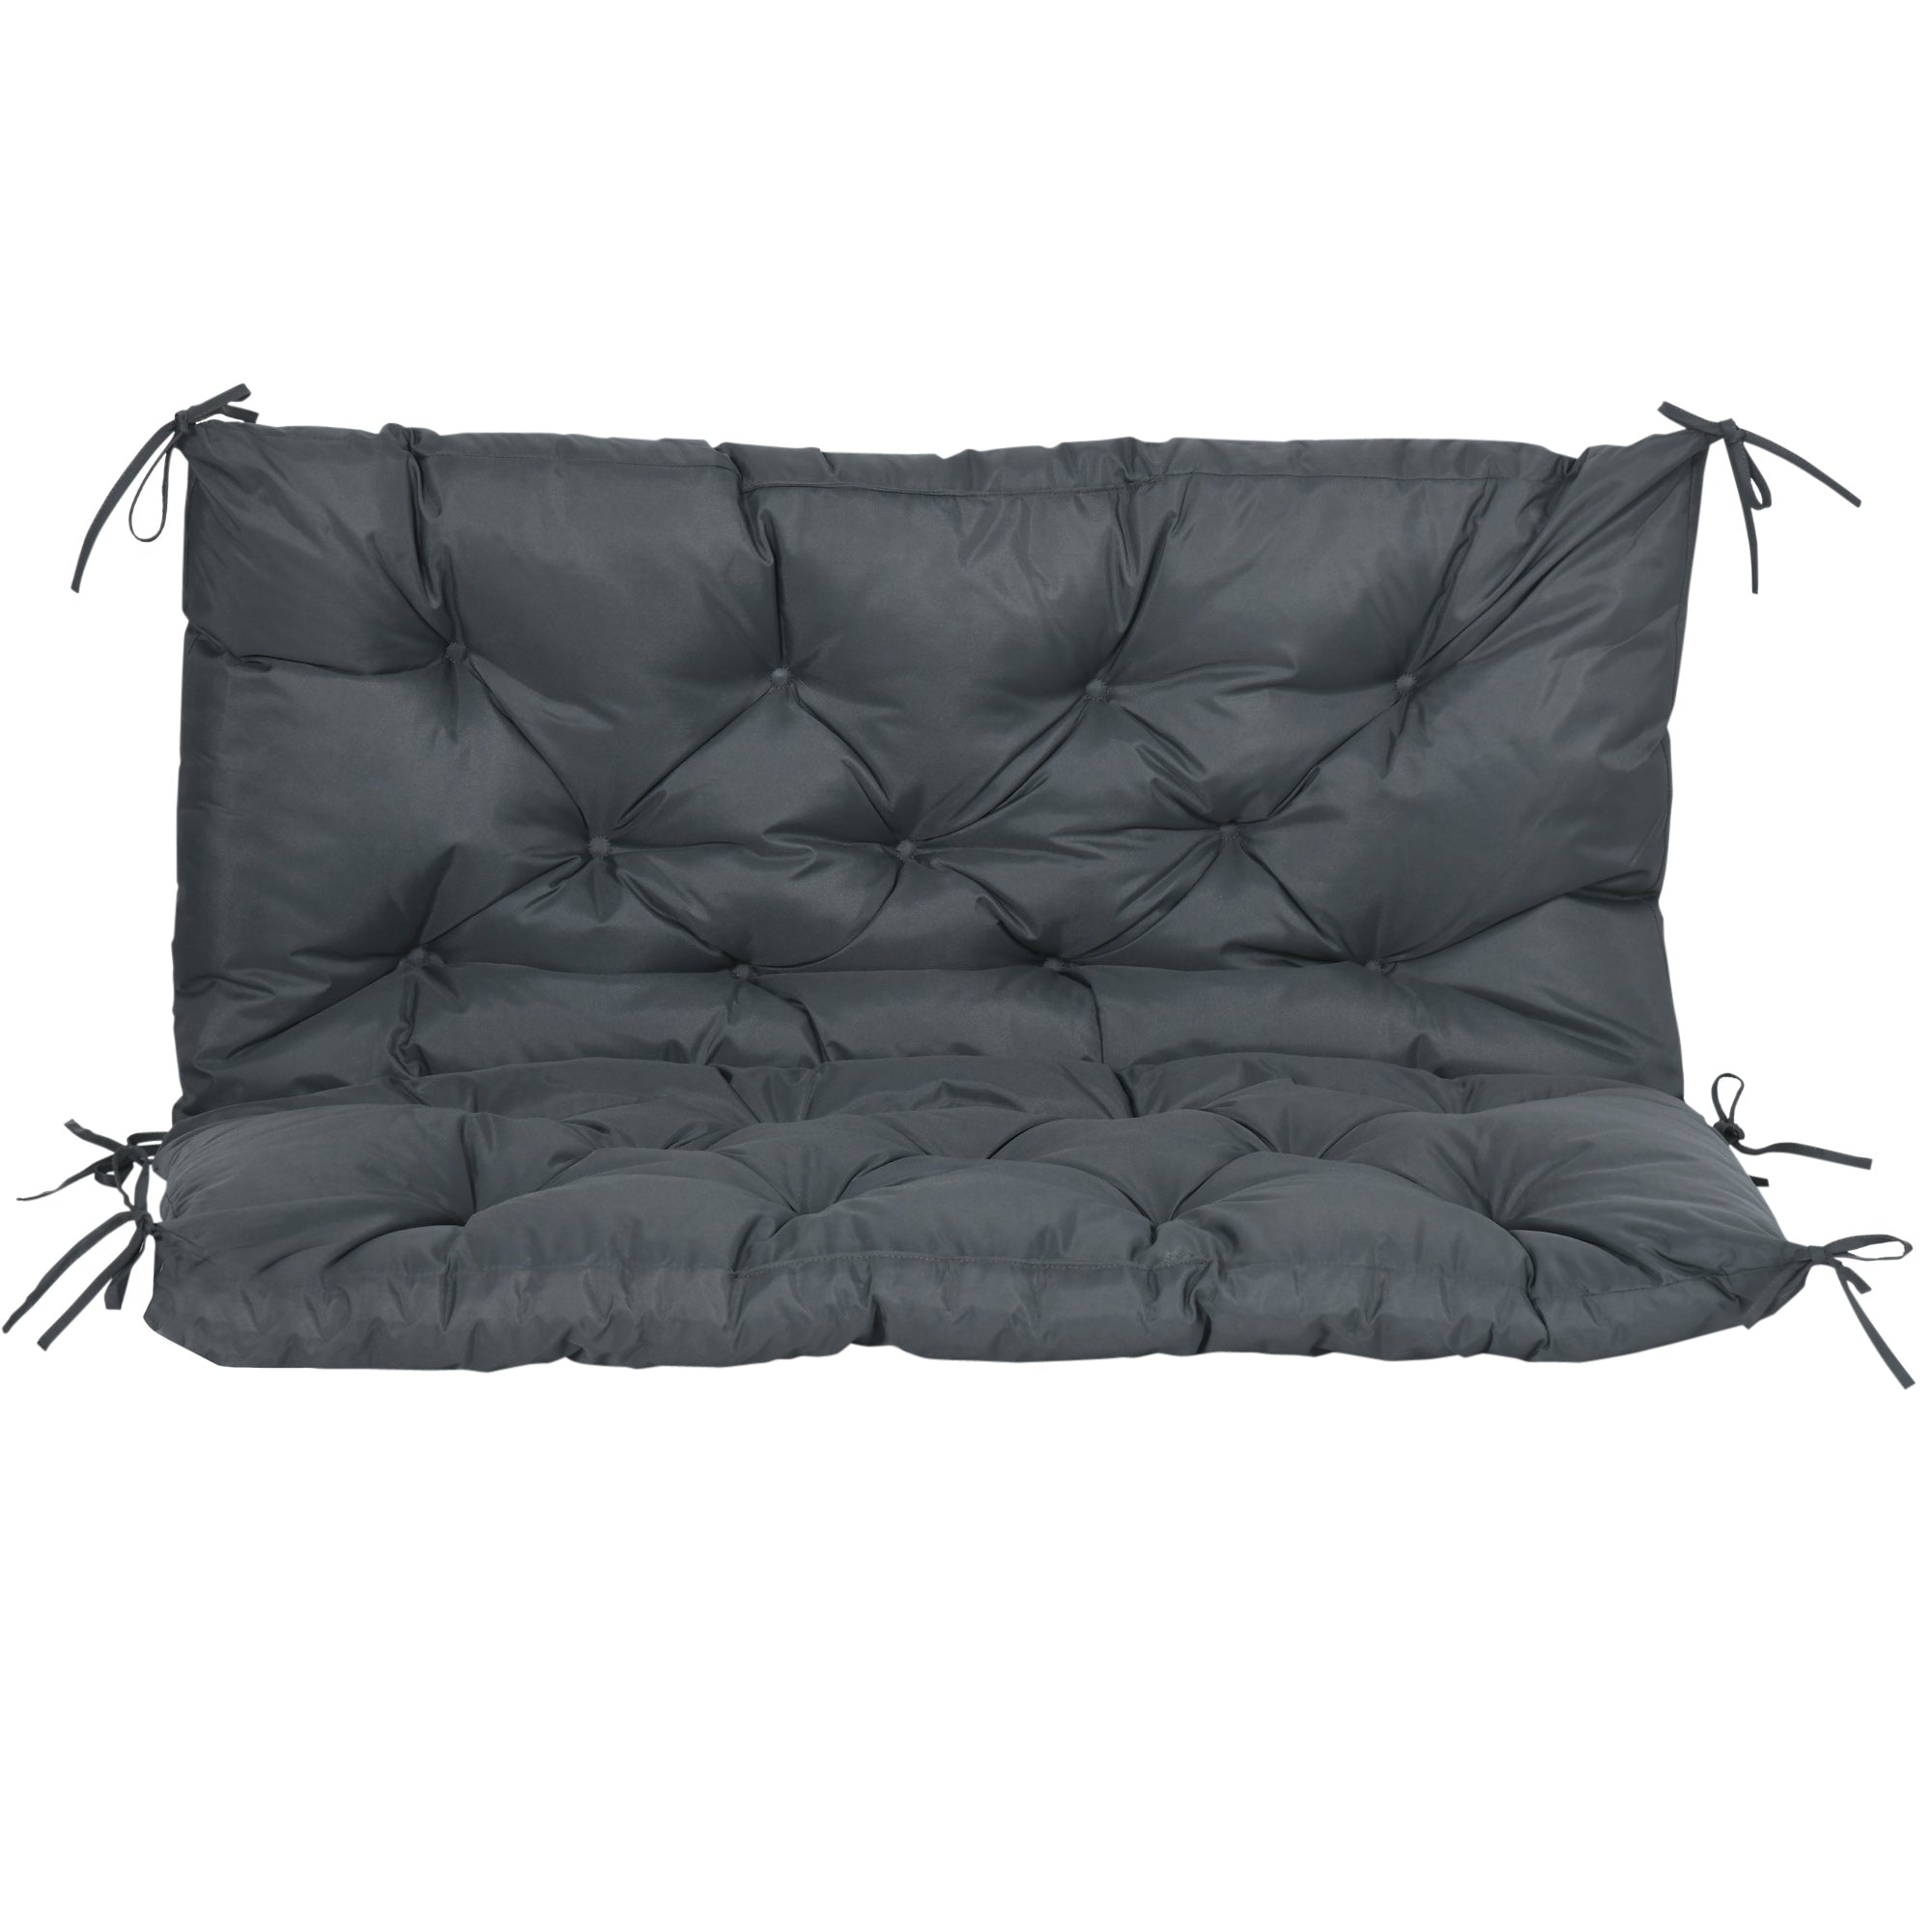 Outsunny 2 Seater Bench Cushion, Garden Chair Cushion with Back and Ties for Indoor and Outdoor Use, 98 x 100 cm, Dark Grey